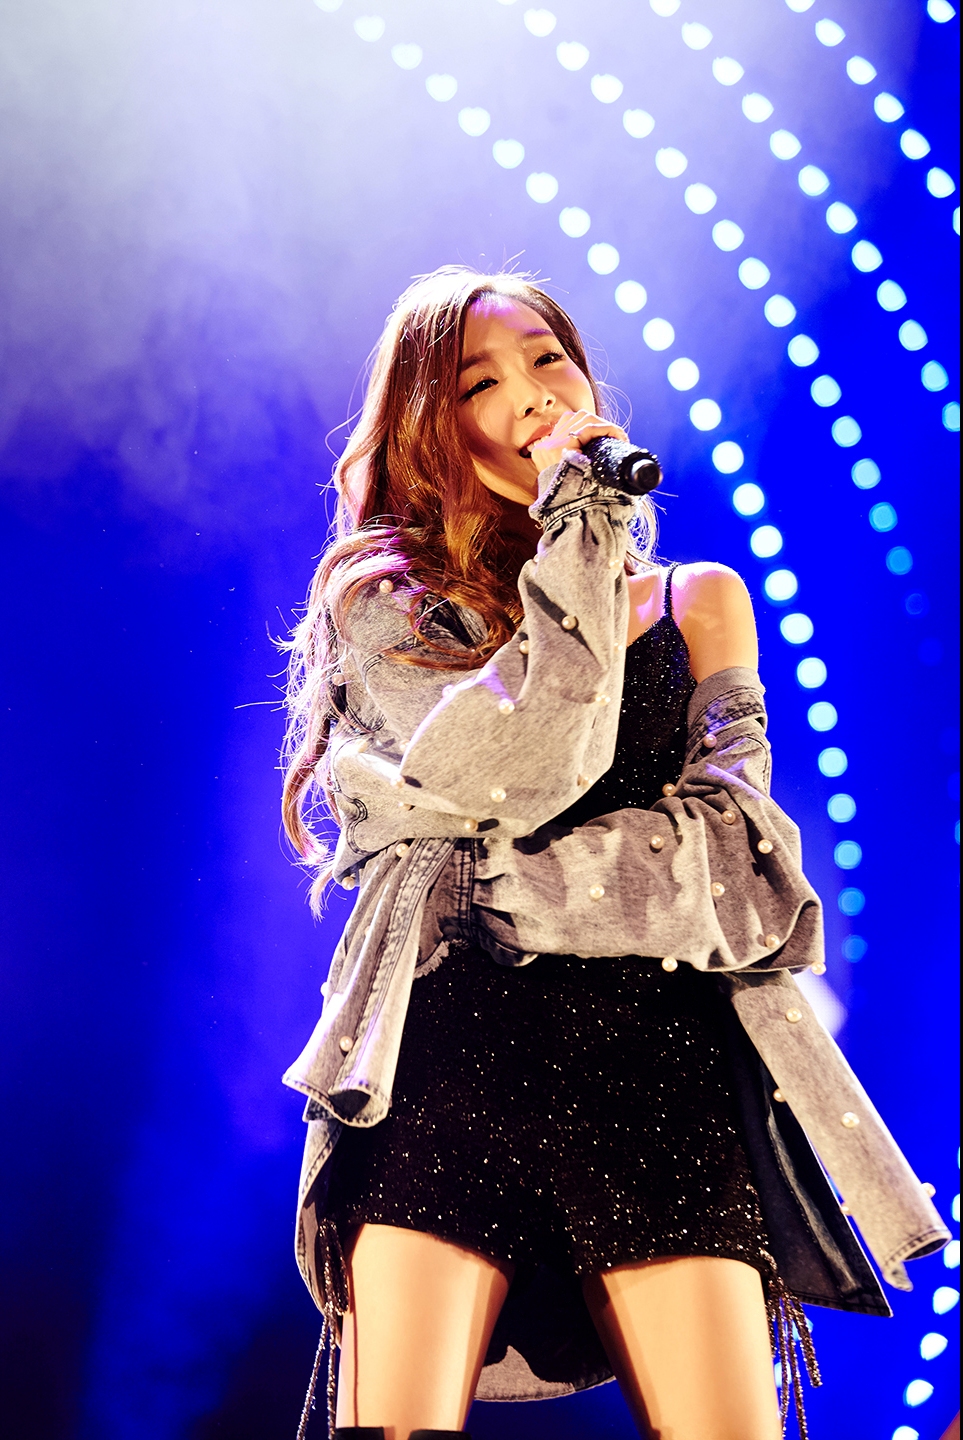 Check out SNSD Tiffany's pictures from her 'WEEKEND' concert ...